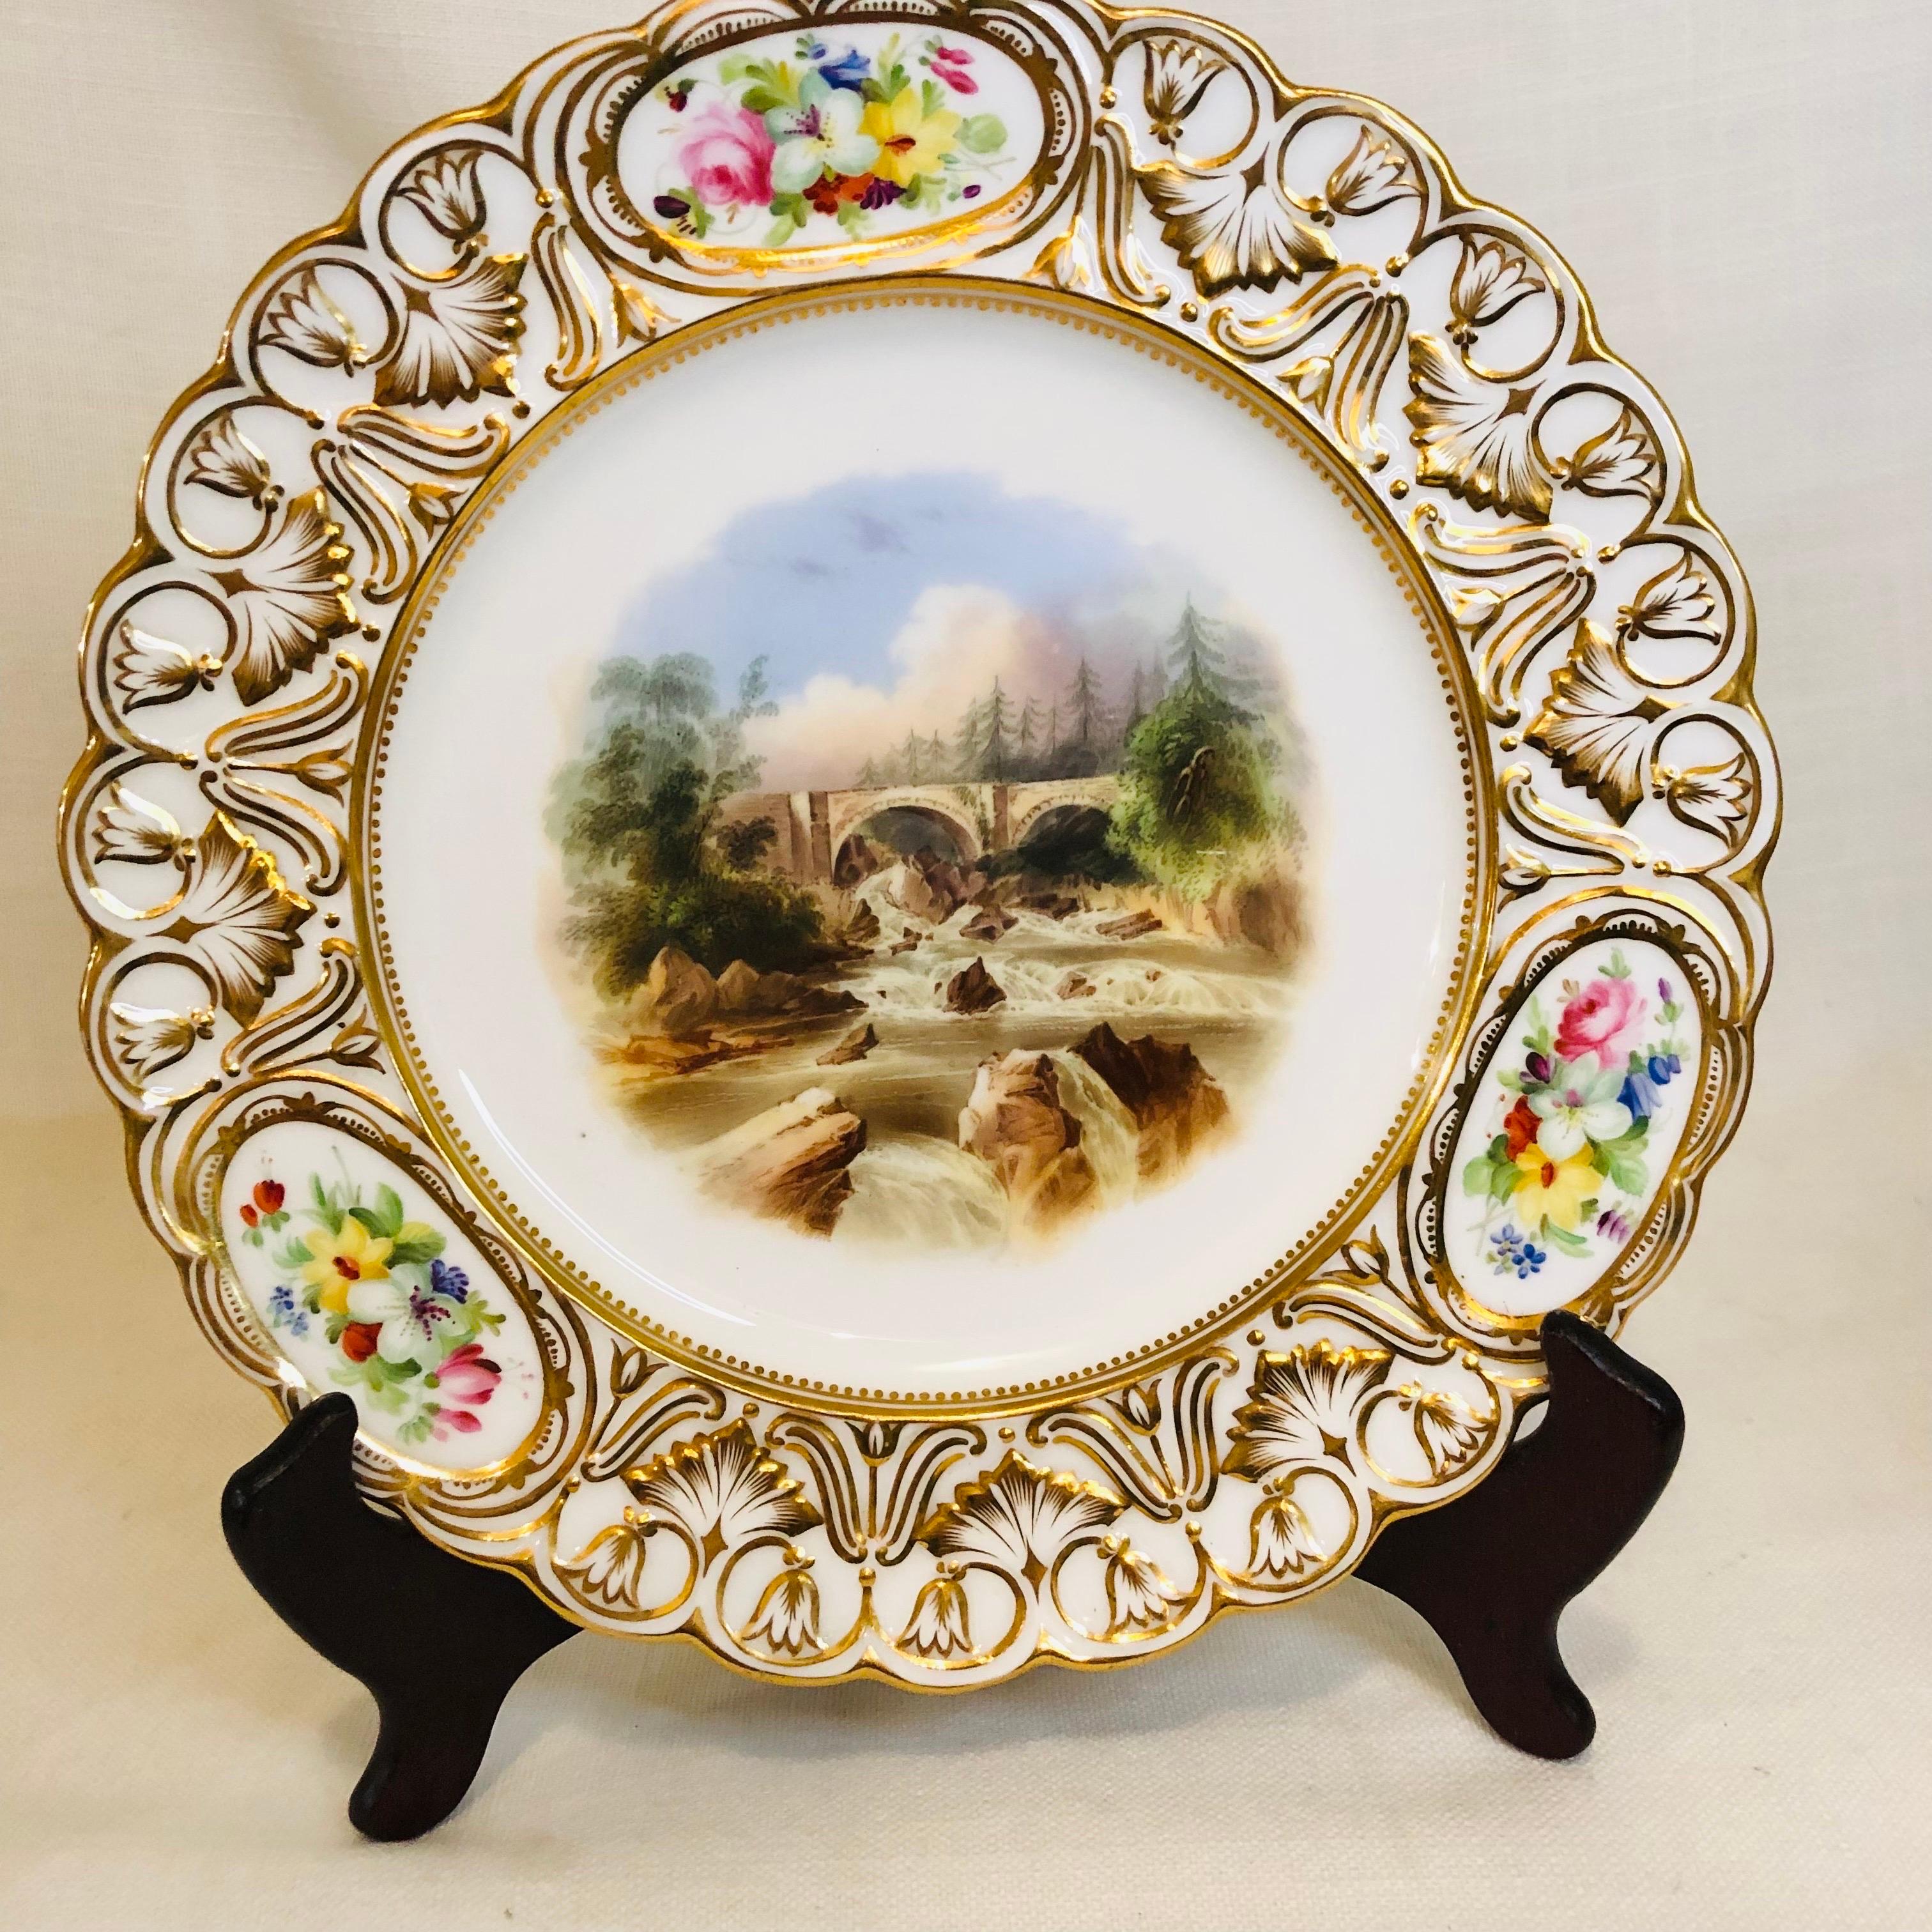 Set of 16 19th Century Coalport Plates Each Hand-Painted with Magnificent Scenes For Sale 9